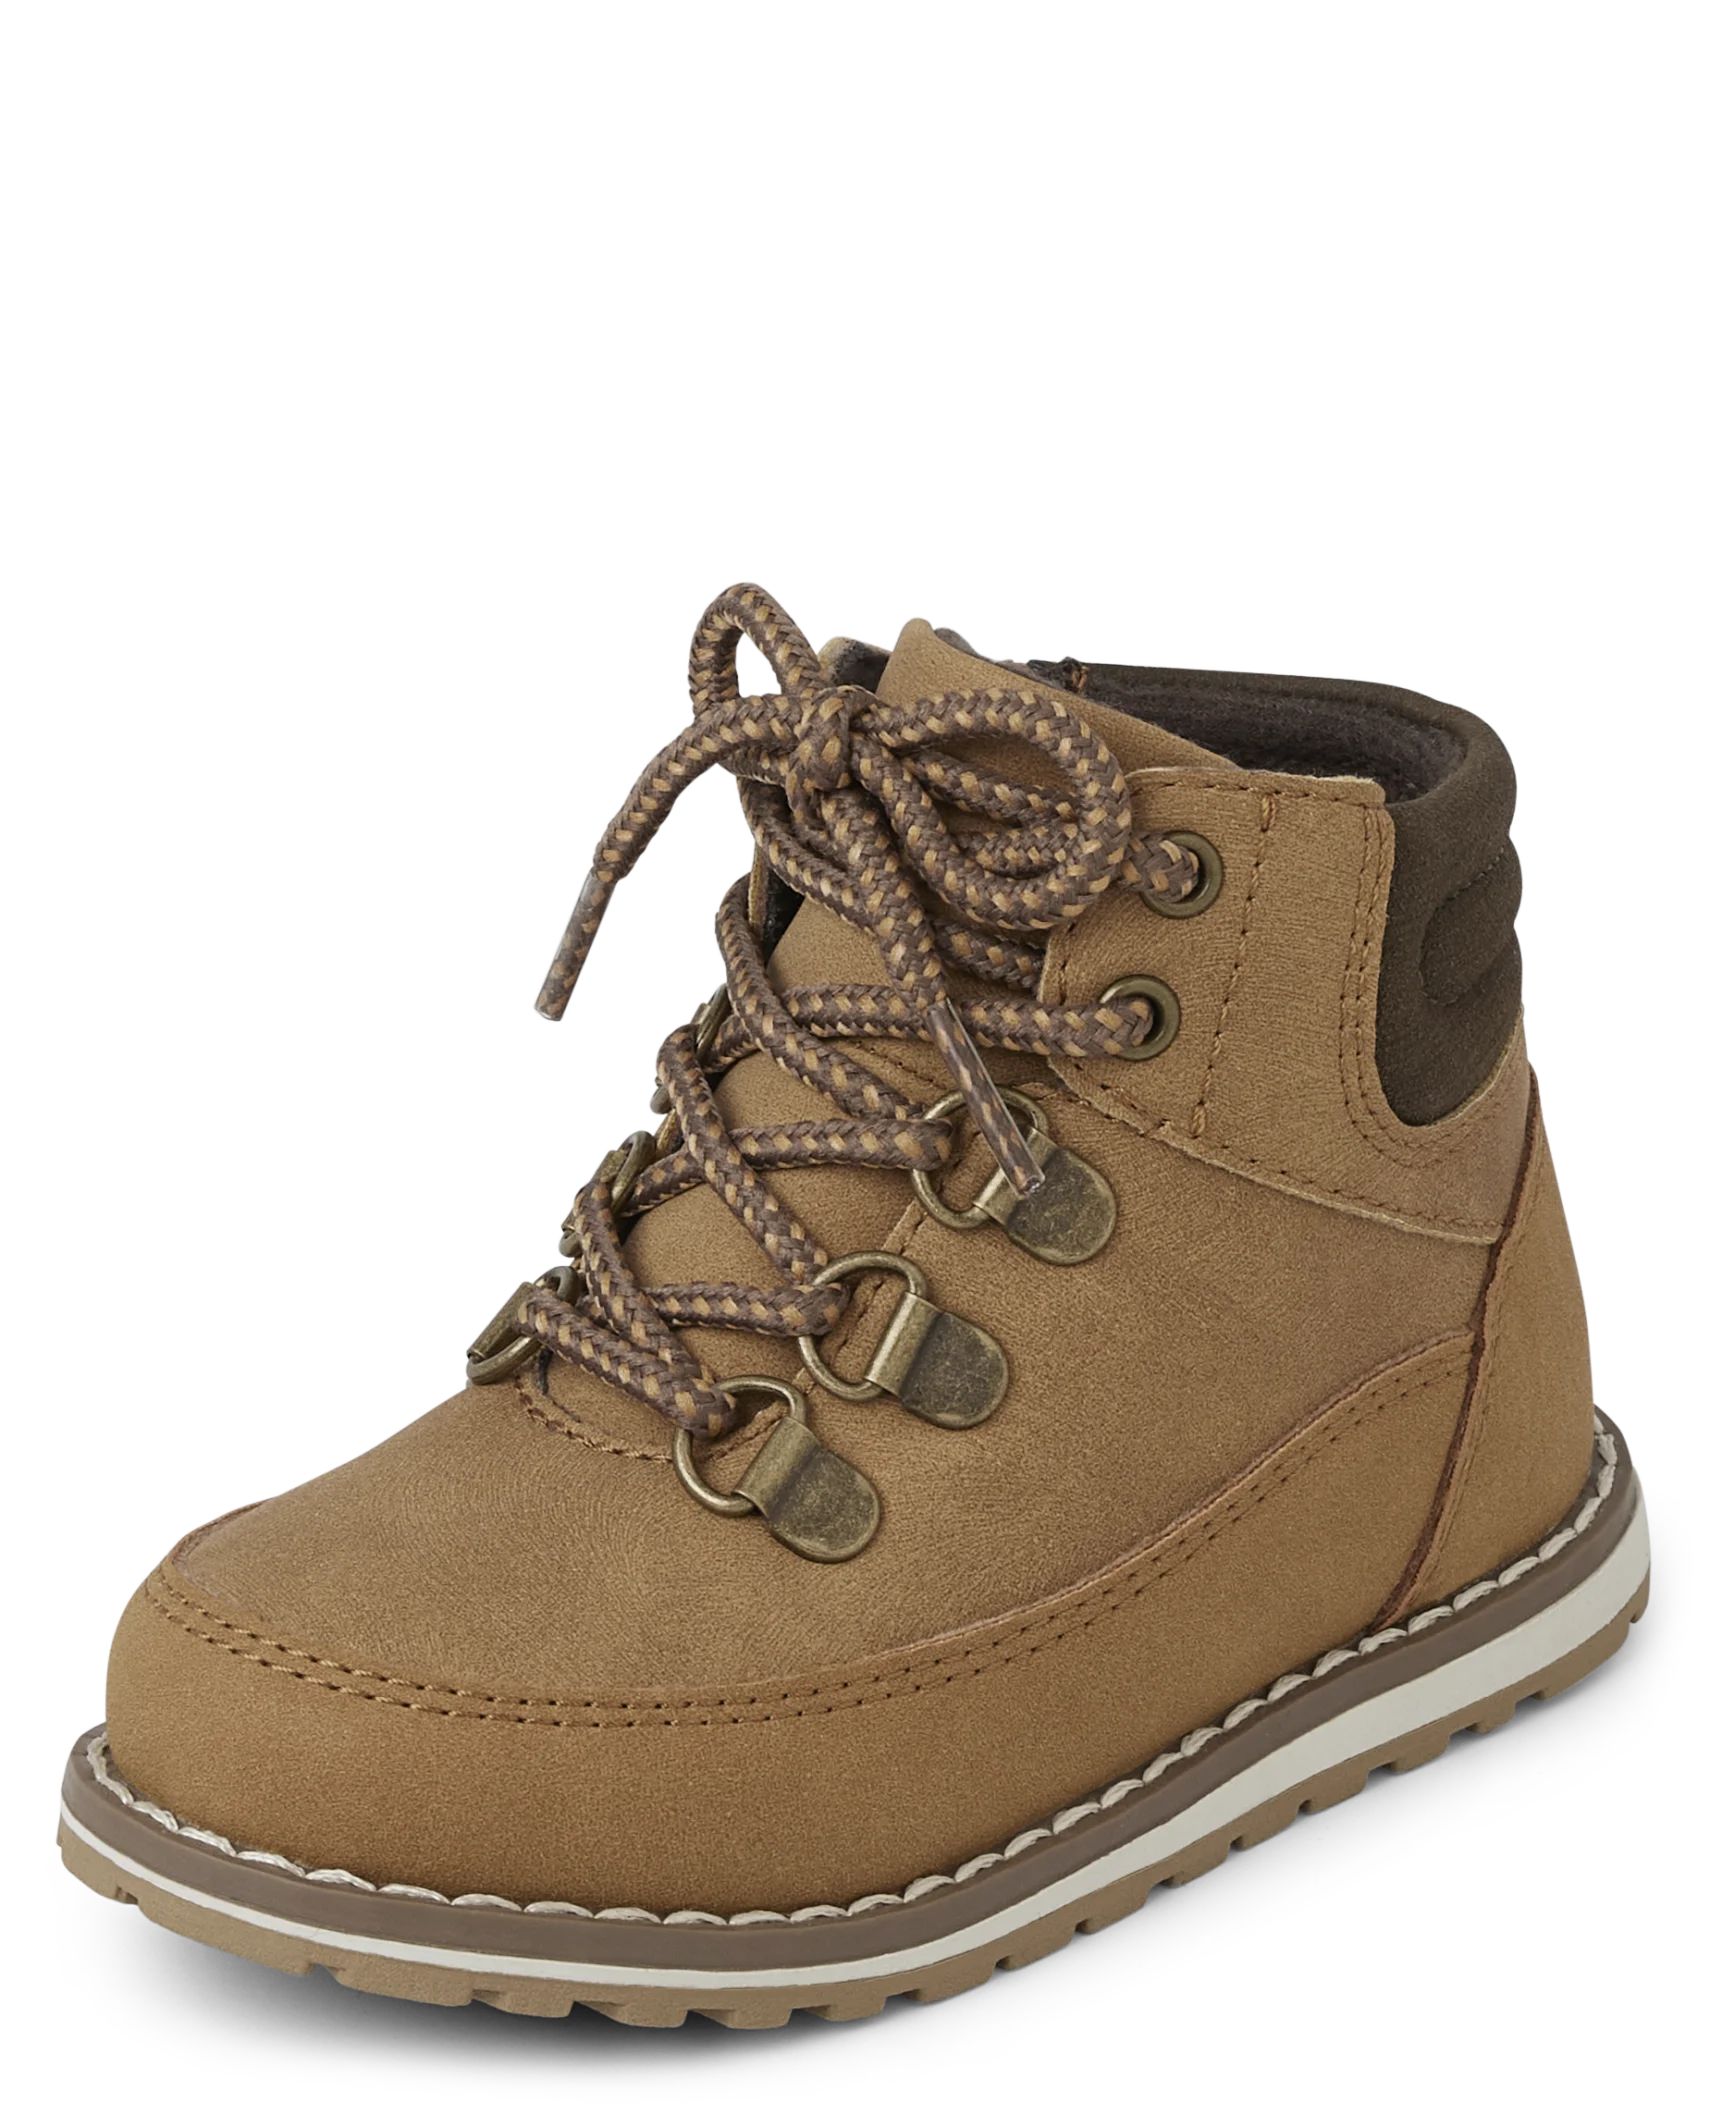 Toddler Boys Lace-Up Hi-Top Boots - tan | The Children's Place